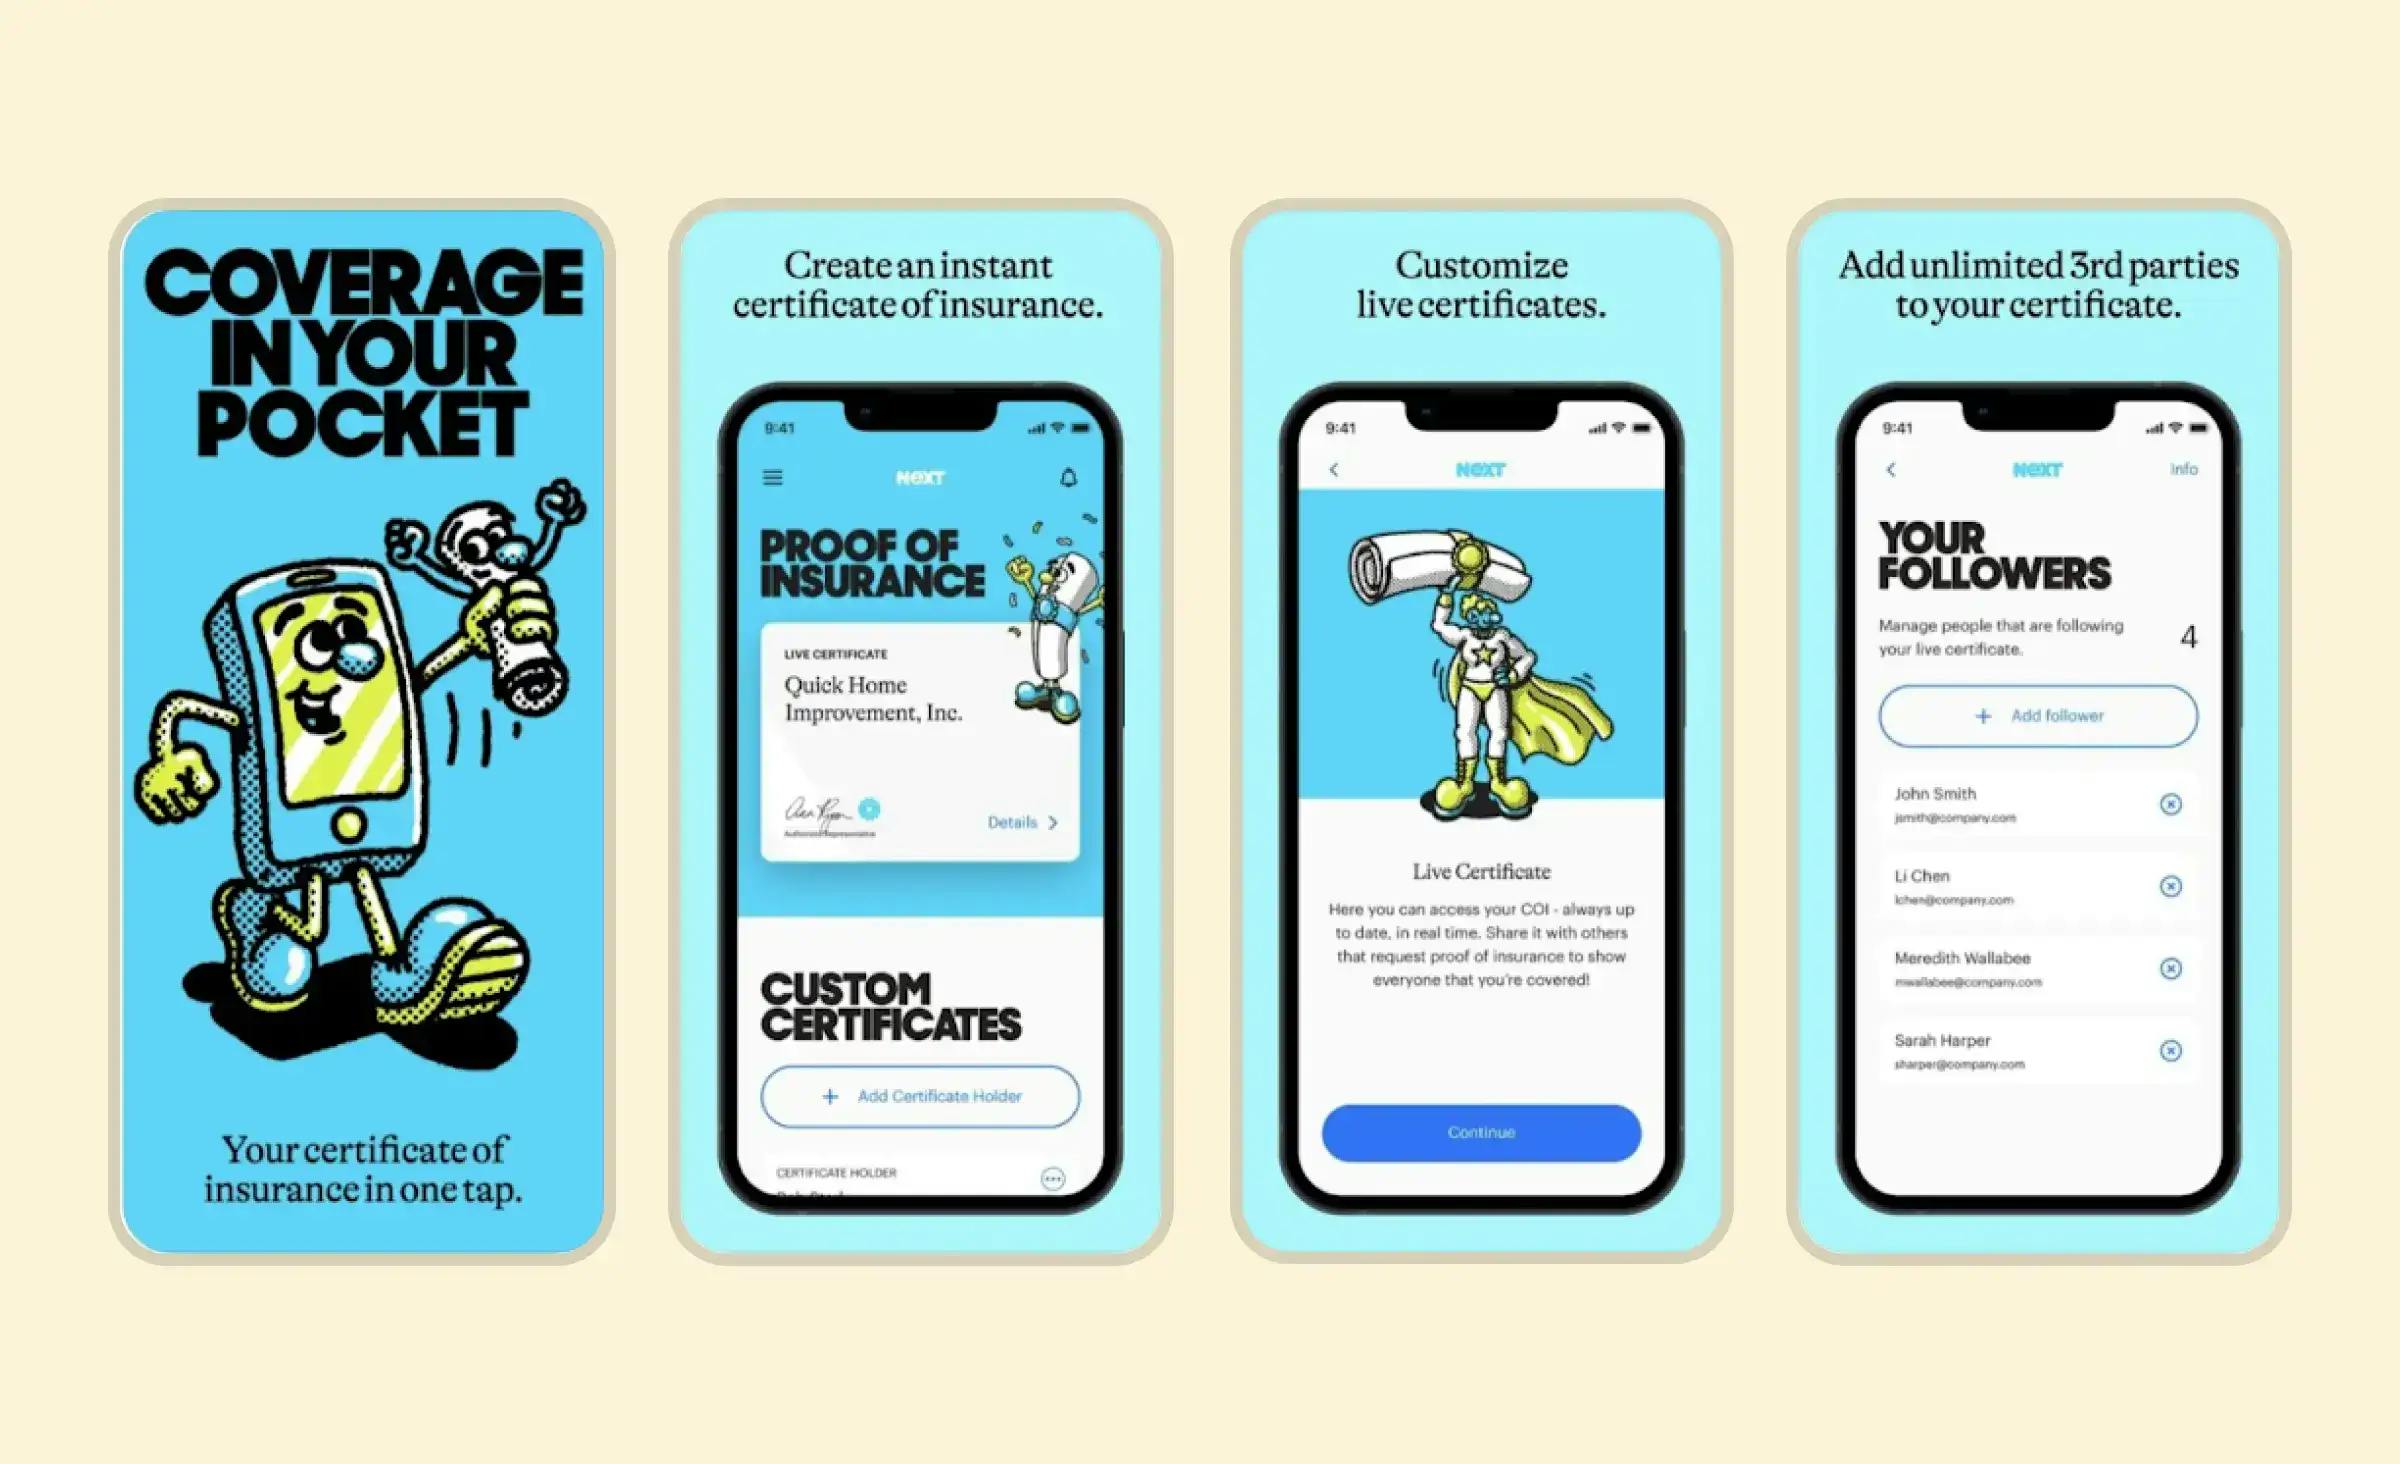 Four screens from the Next business insurance mobile app. The first screen features an anthropomorphic illustration of a mobile app holding a document in its left hand, likely a claim. The text reads "Coverage in your pocket." The second screen displays proof of insurance and offers the option to create a custom certificate. The third screen shows the starting page for customizing a certificate. The fourth screen displays a list of individuals who have followed the user's life certificate.